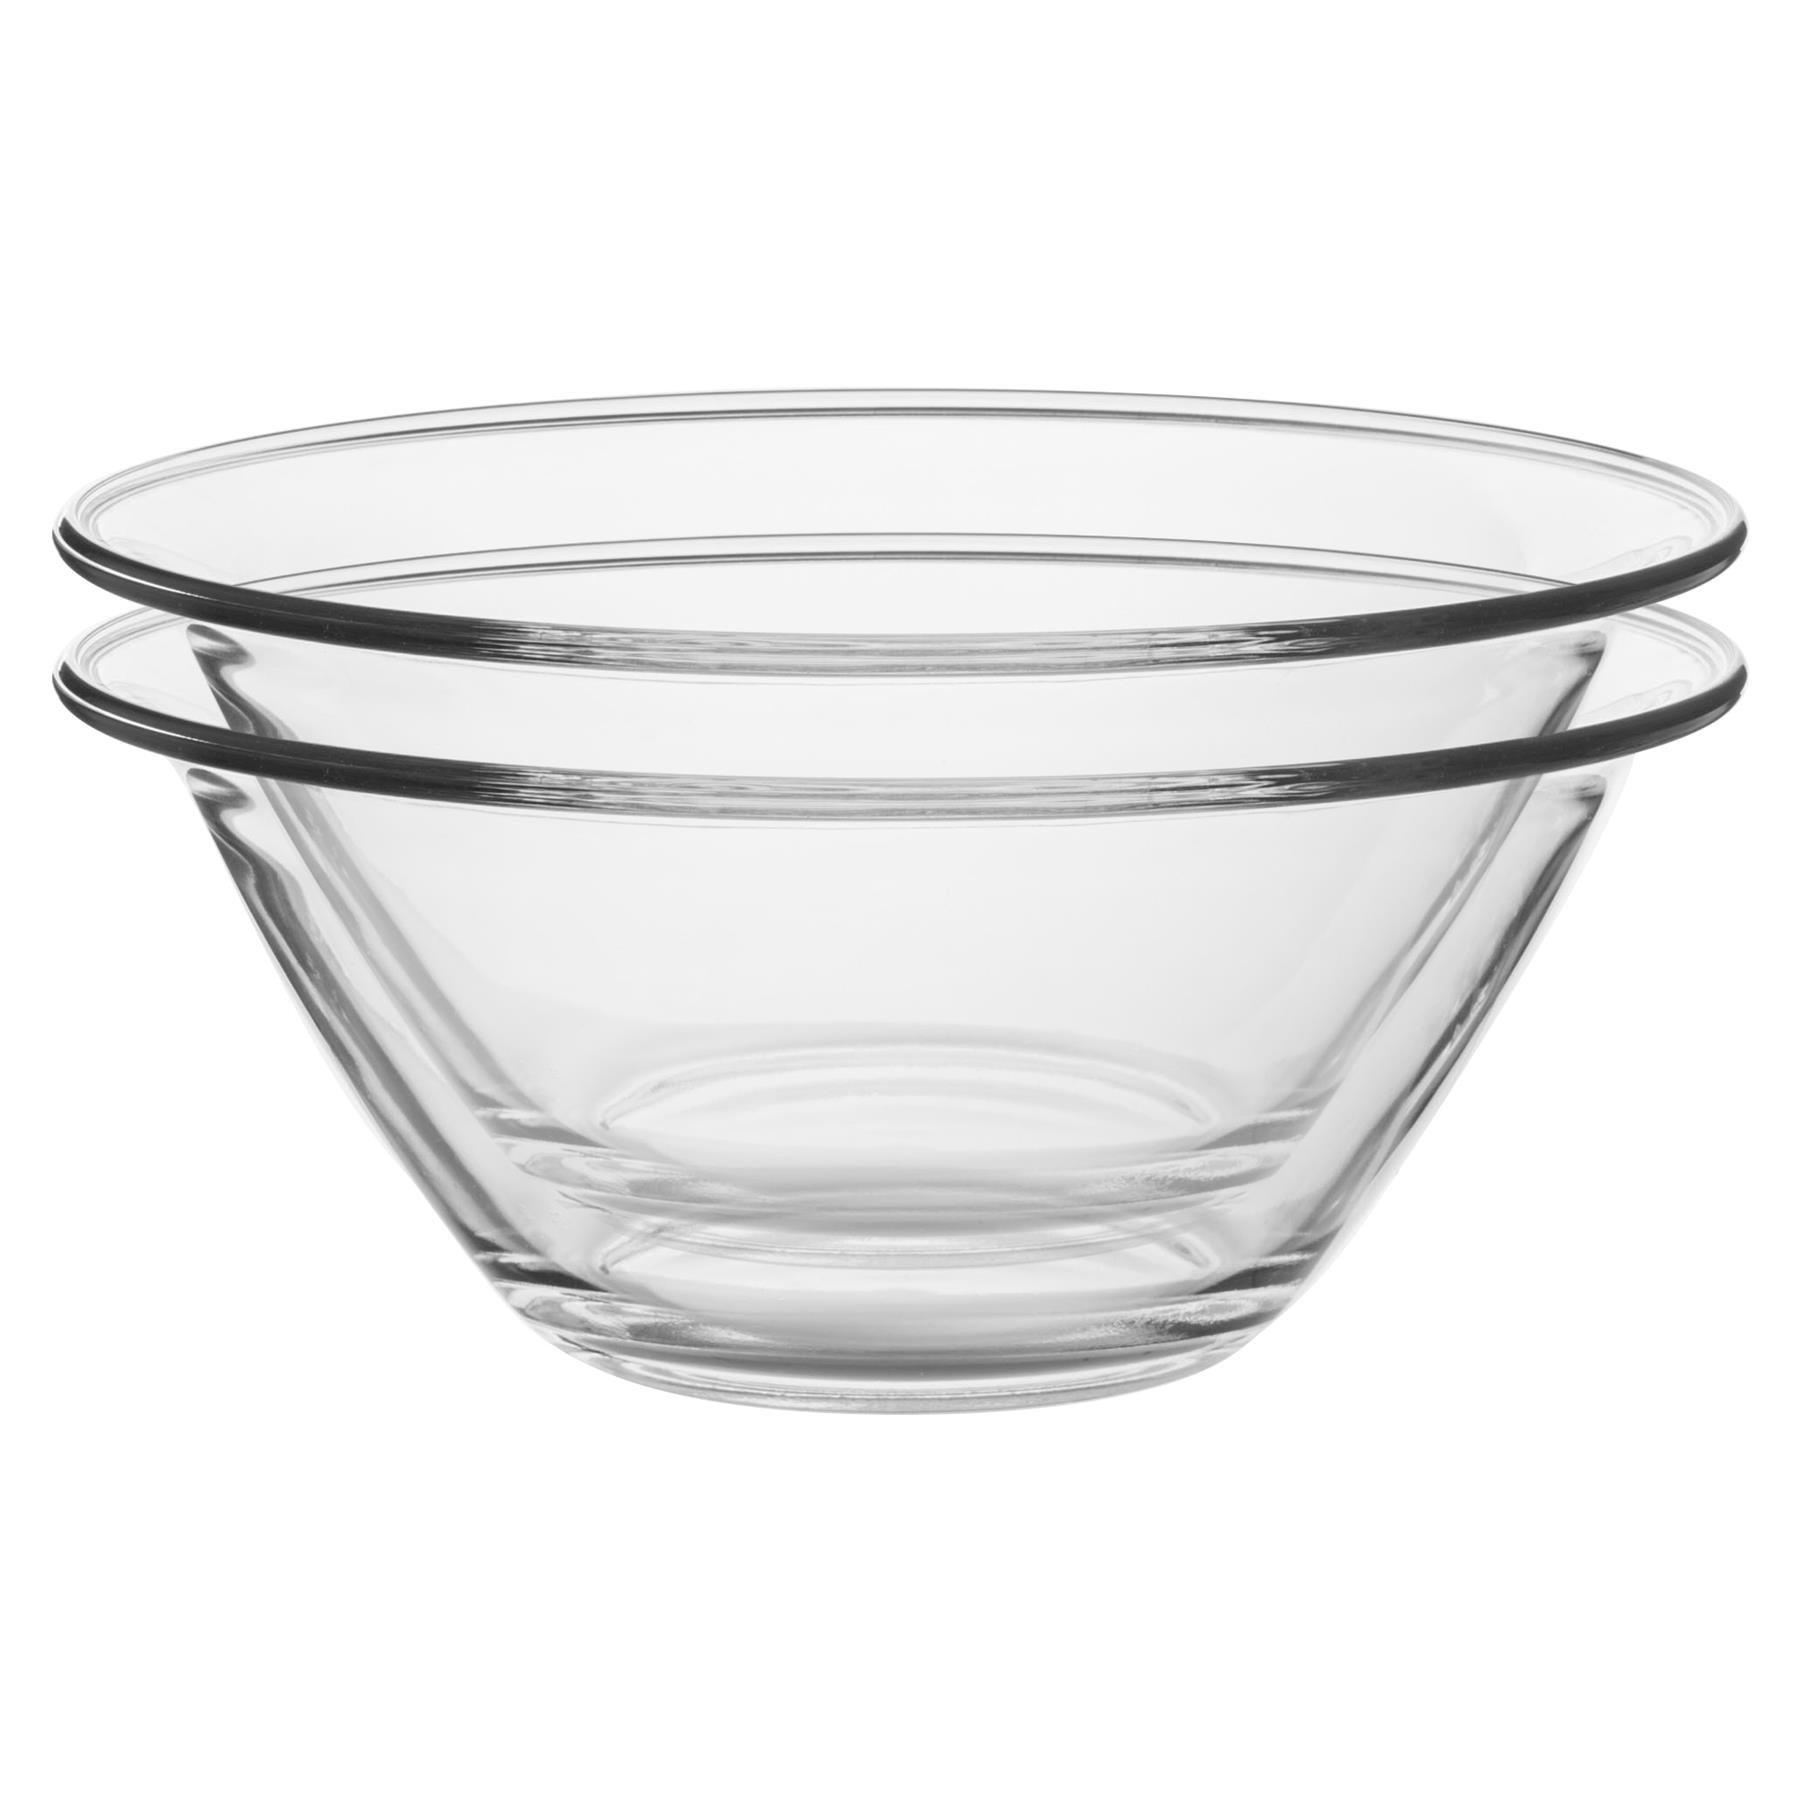 Mr Chef Glass Nesting Mixing Bowls 4 Litres Pack of 6